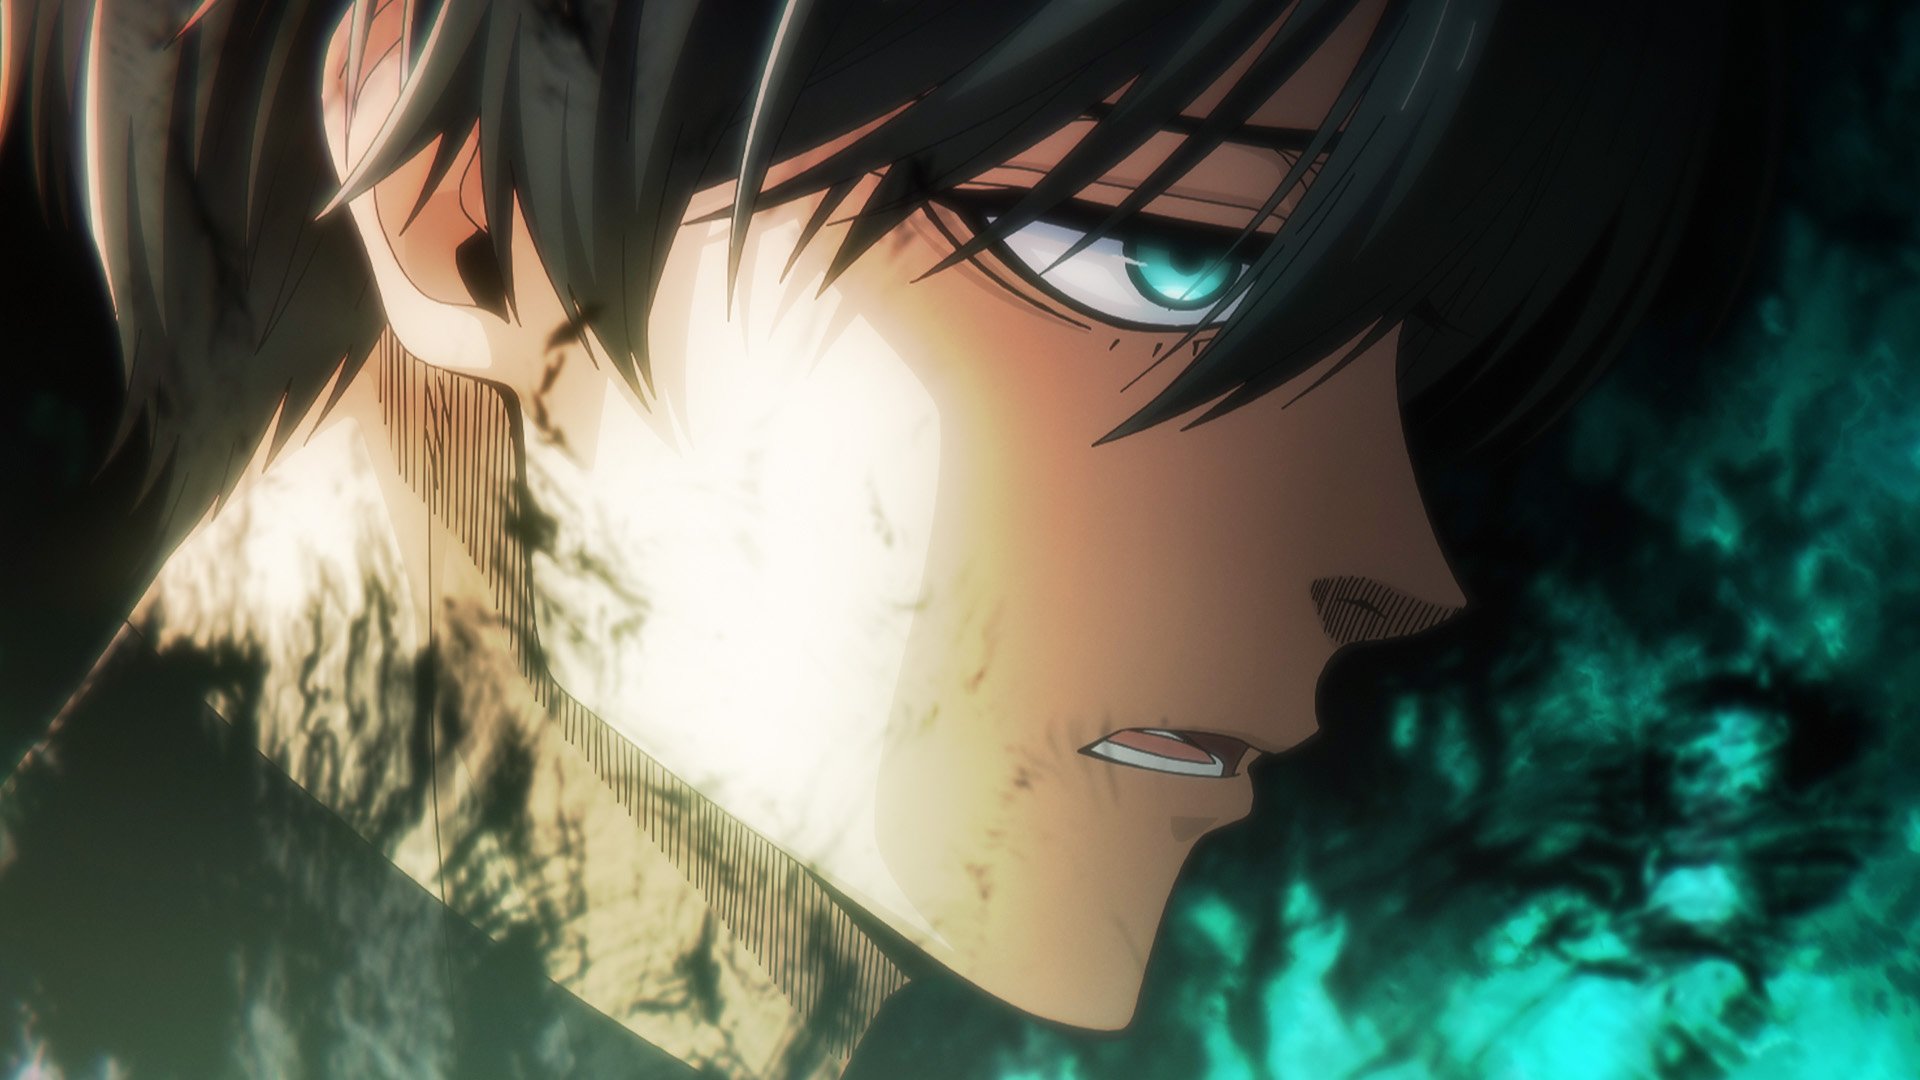 Blue Lock Episode 12 Release Date, and What Is Behind the Door?